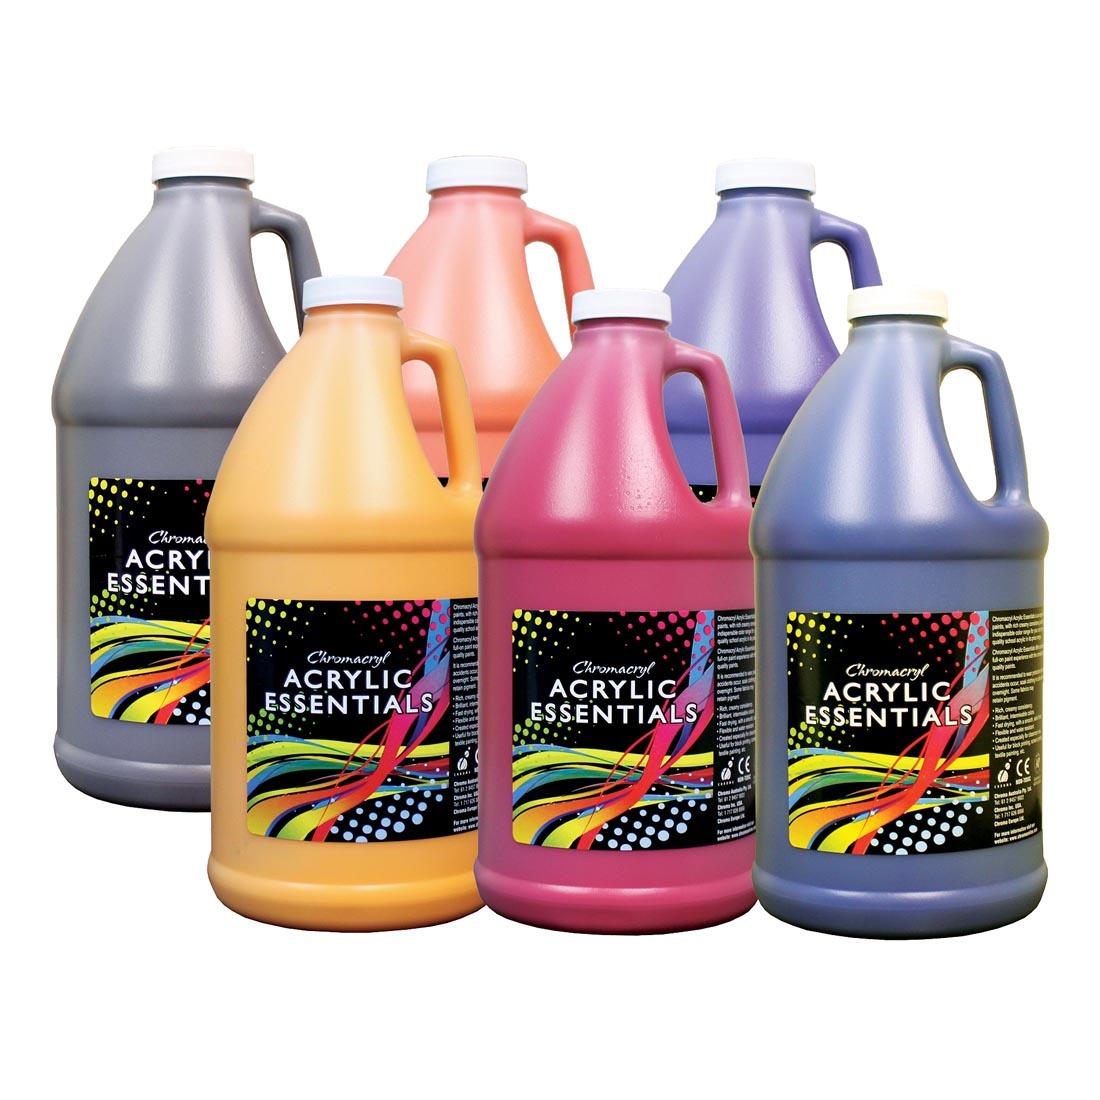 Chromacryl Acrylic Essentials Secondary Colors Set in Six 1/2 Gallons